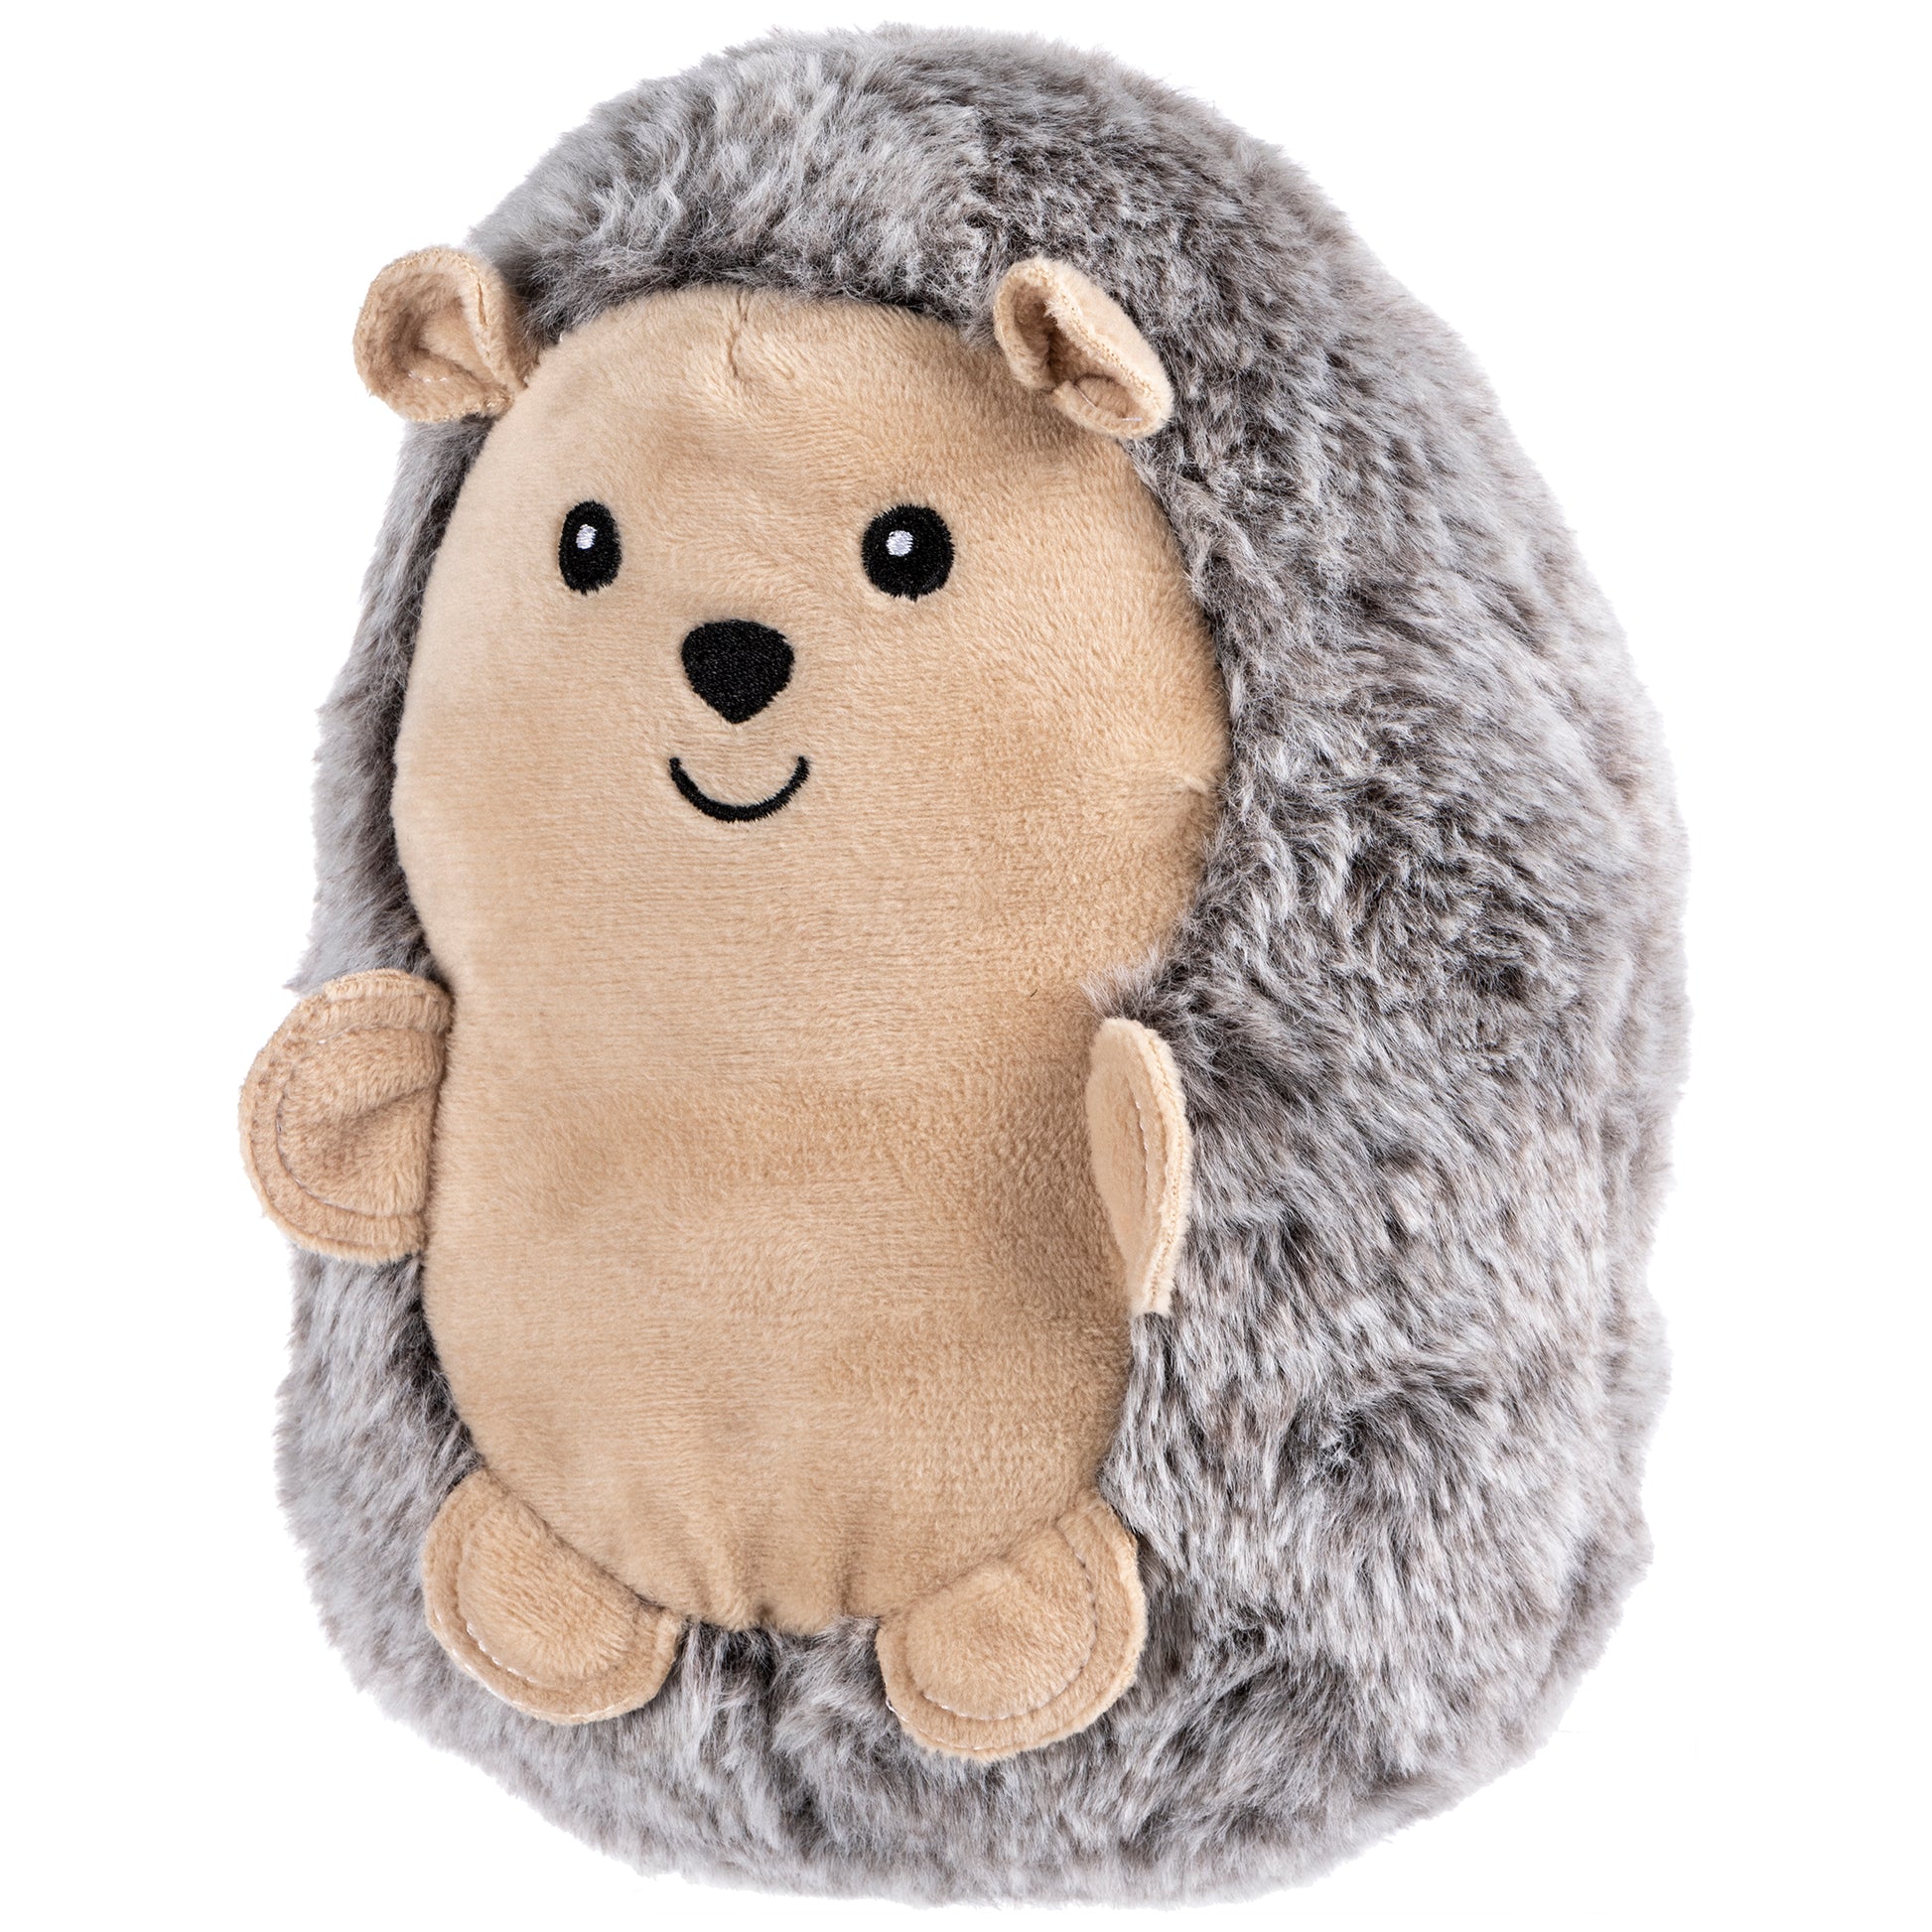 Hedgehog plush toy is made of soft plush with a beige back, whisper white belly and face, pale peach blush feet and ears, and an iron gray embroidered face.